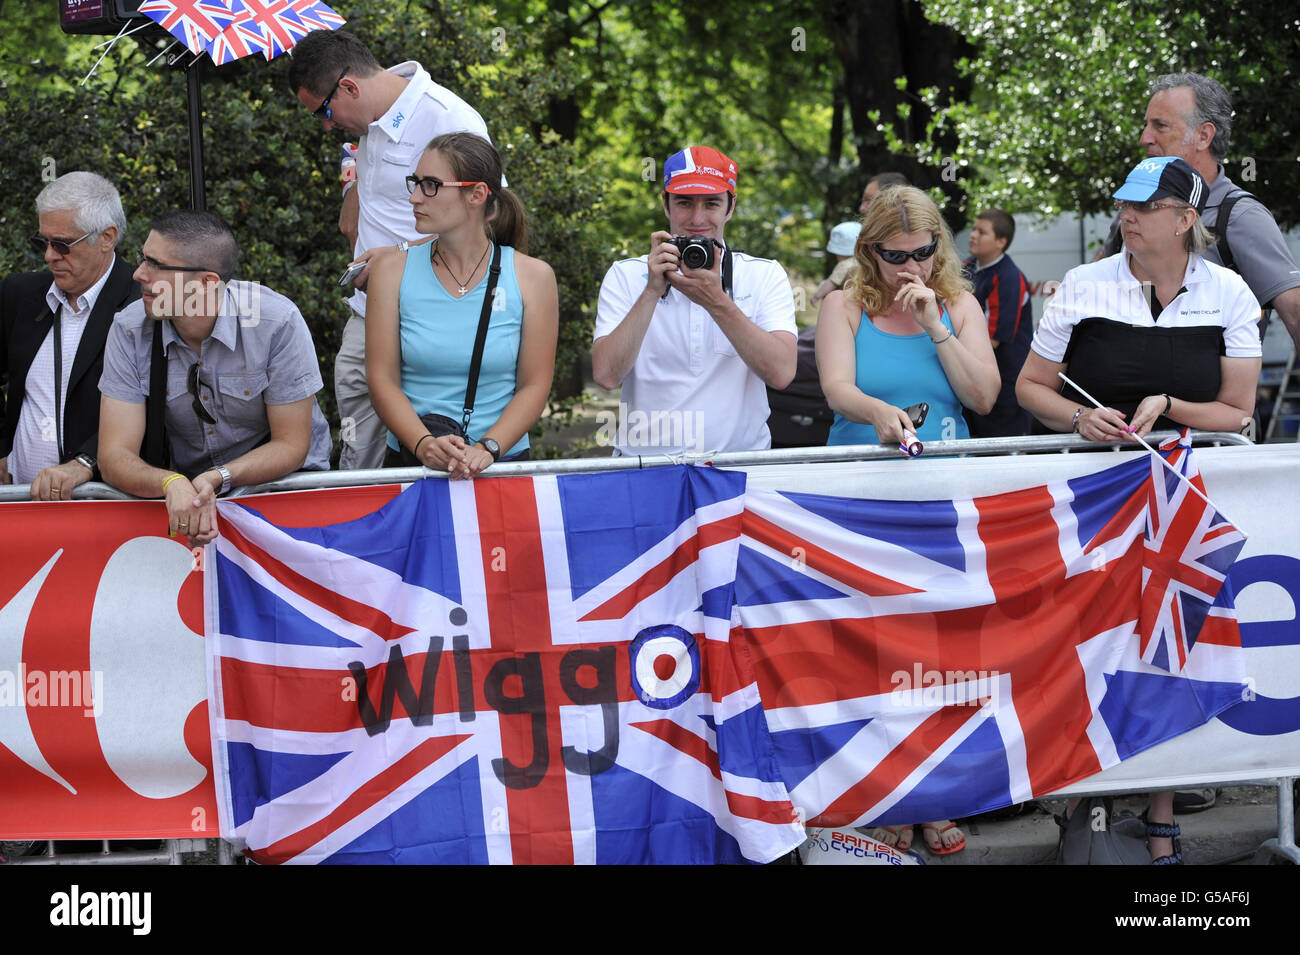 Bradley Wiggins fans during the Prologue Stage of the 2012 Tour de France in Liege, Belgium. Stock Photo